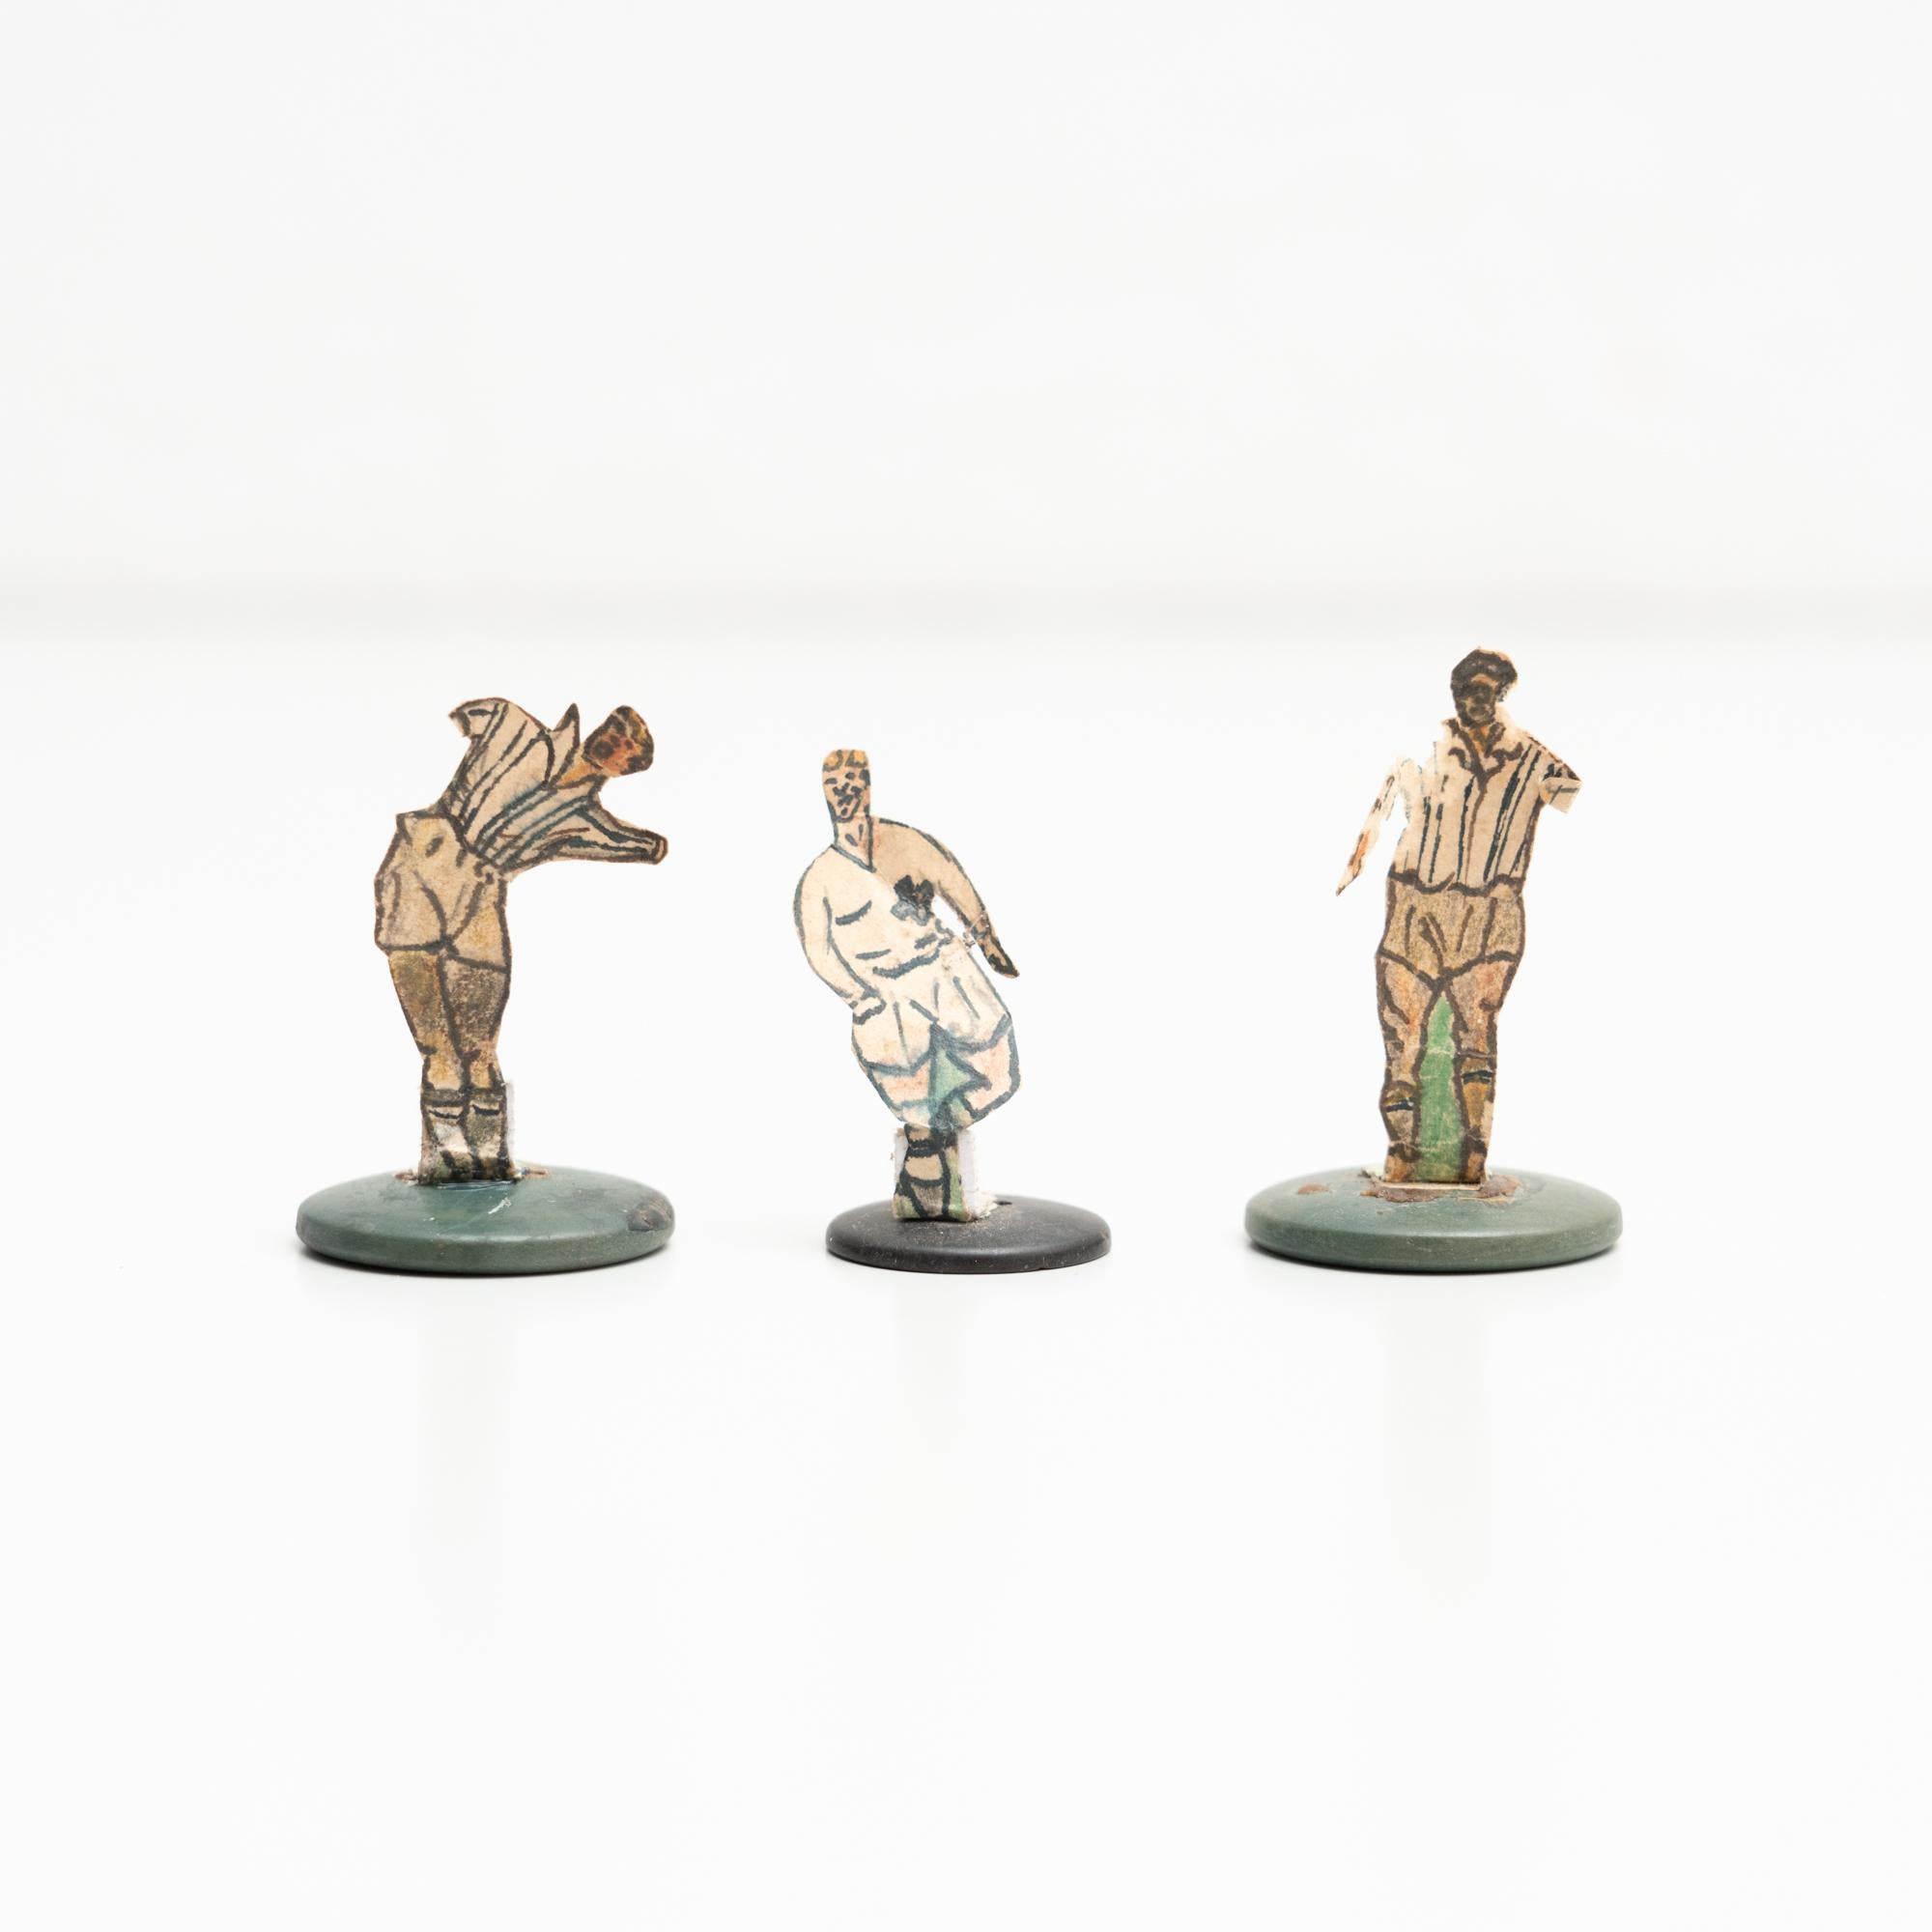 Set of three table button soccer game players. Traditional figures used to play this classic button Spanish game. 

The players are build buy attaching a printed photography or drawing of an actual football soccer player to a clothing button.